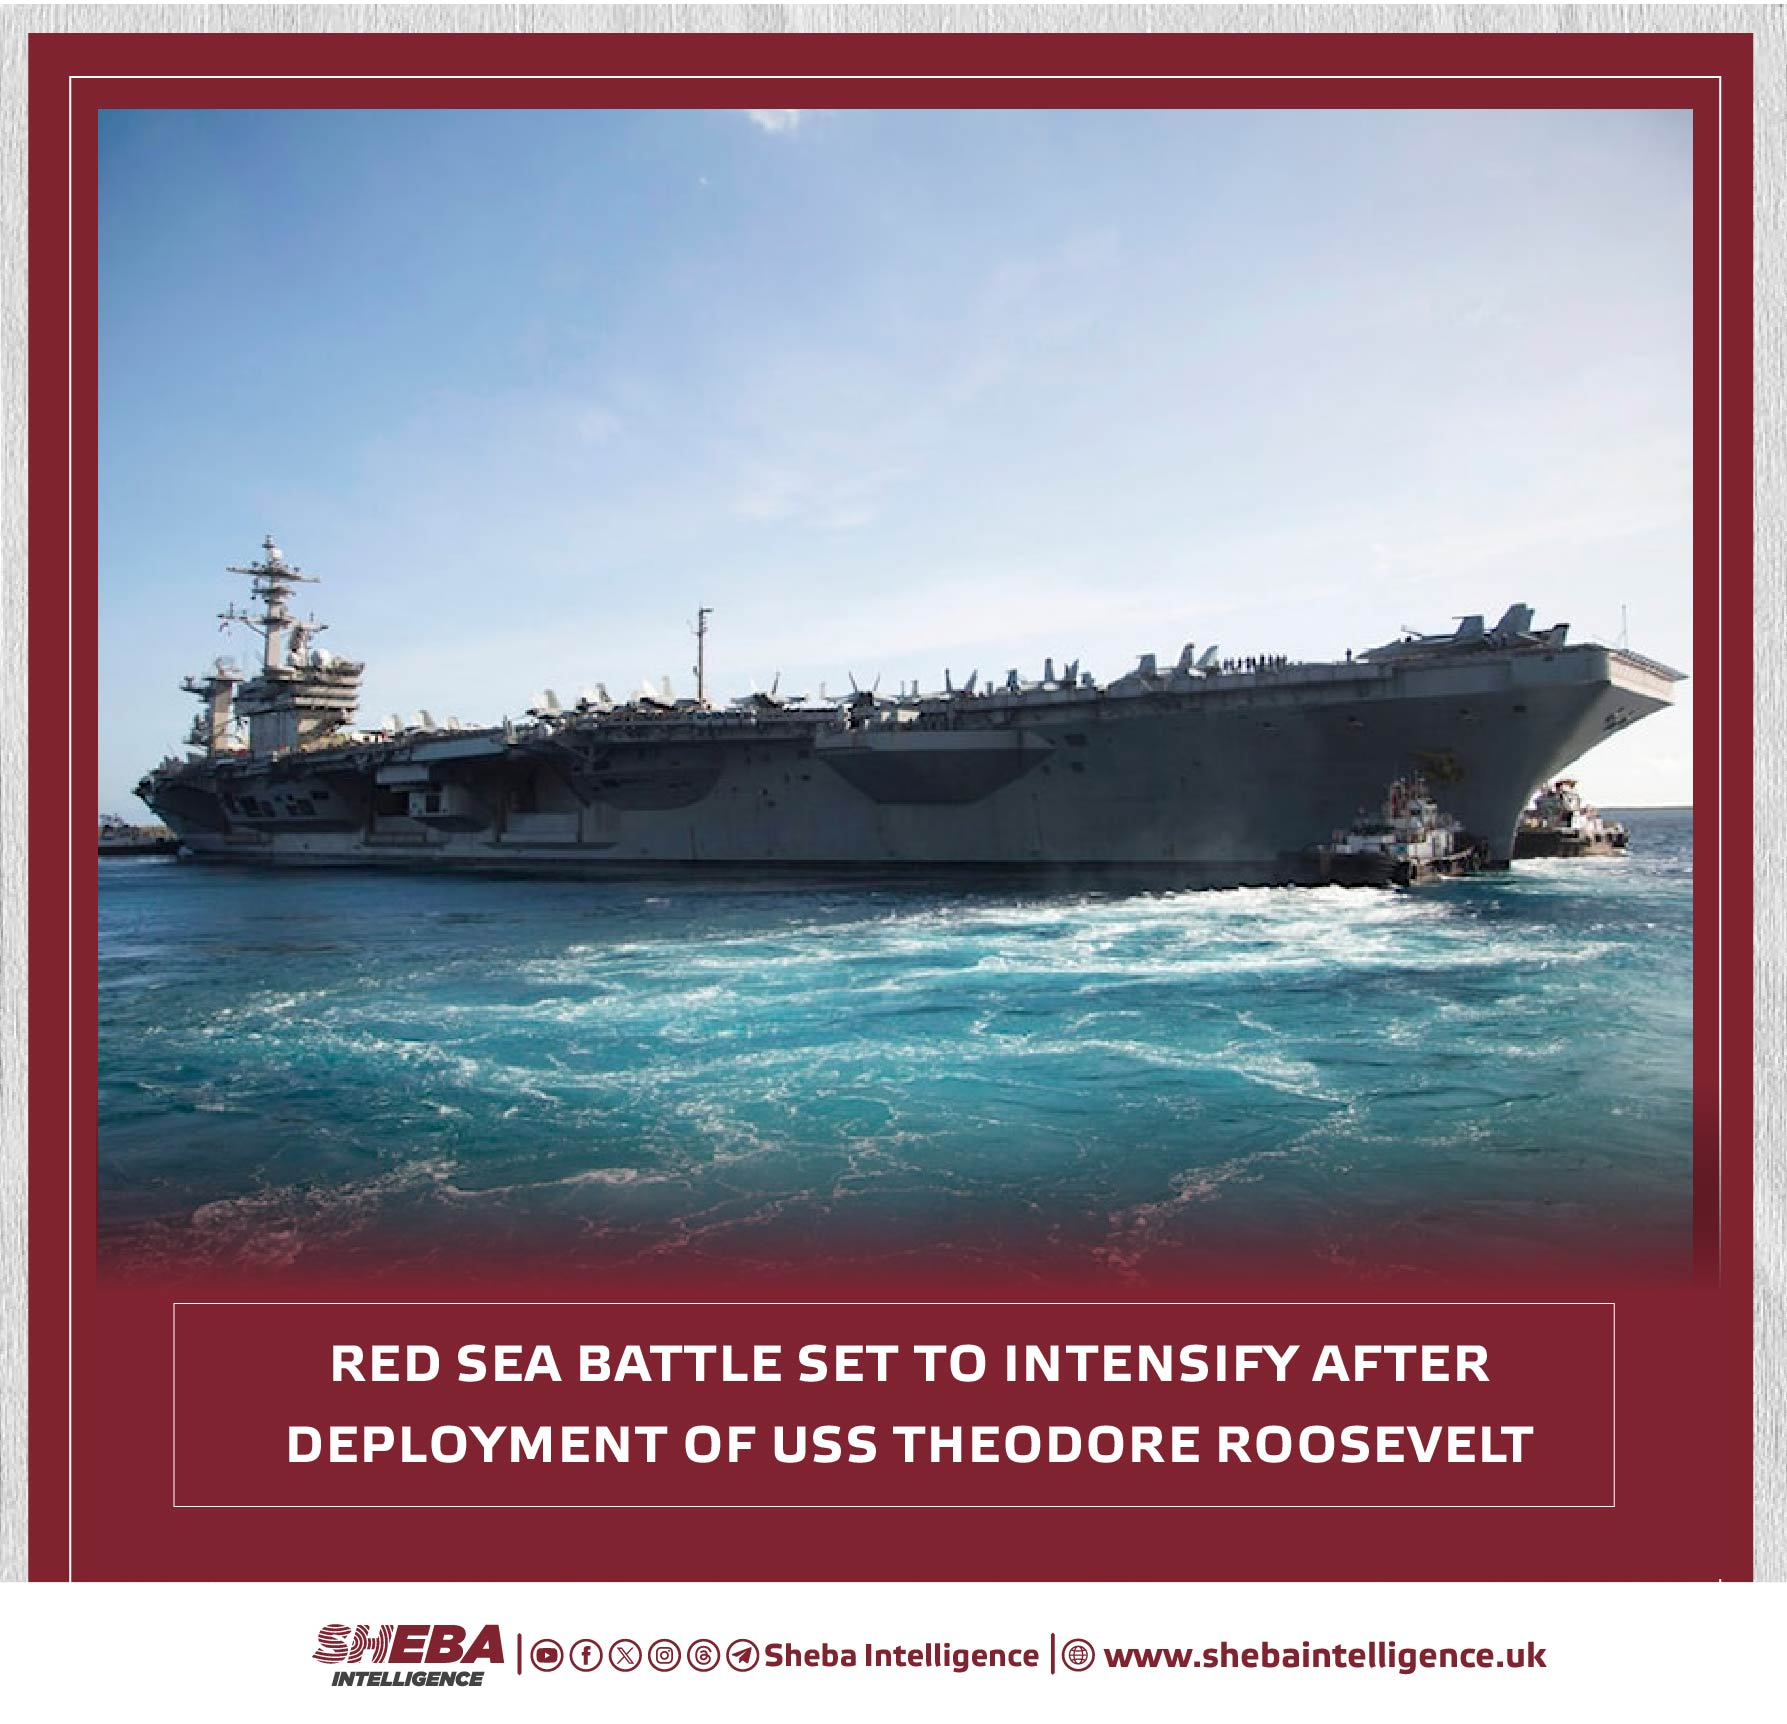 Red Sea Battle Set to Intensify After Deployment of USS Theodore Roosevelt